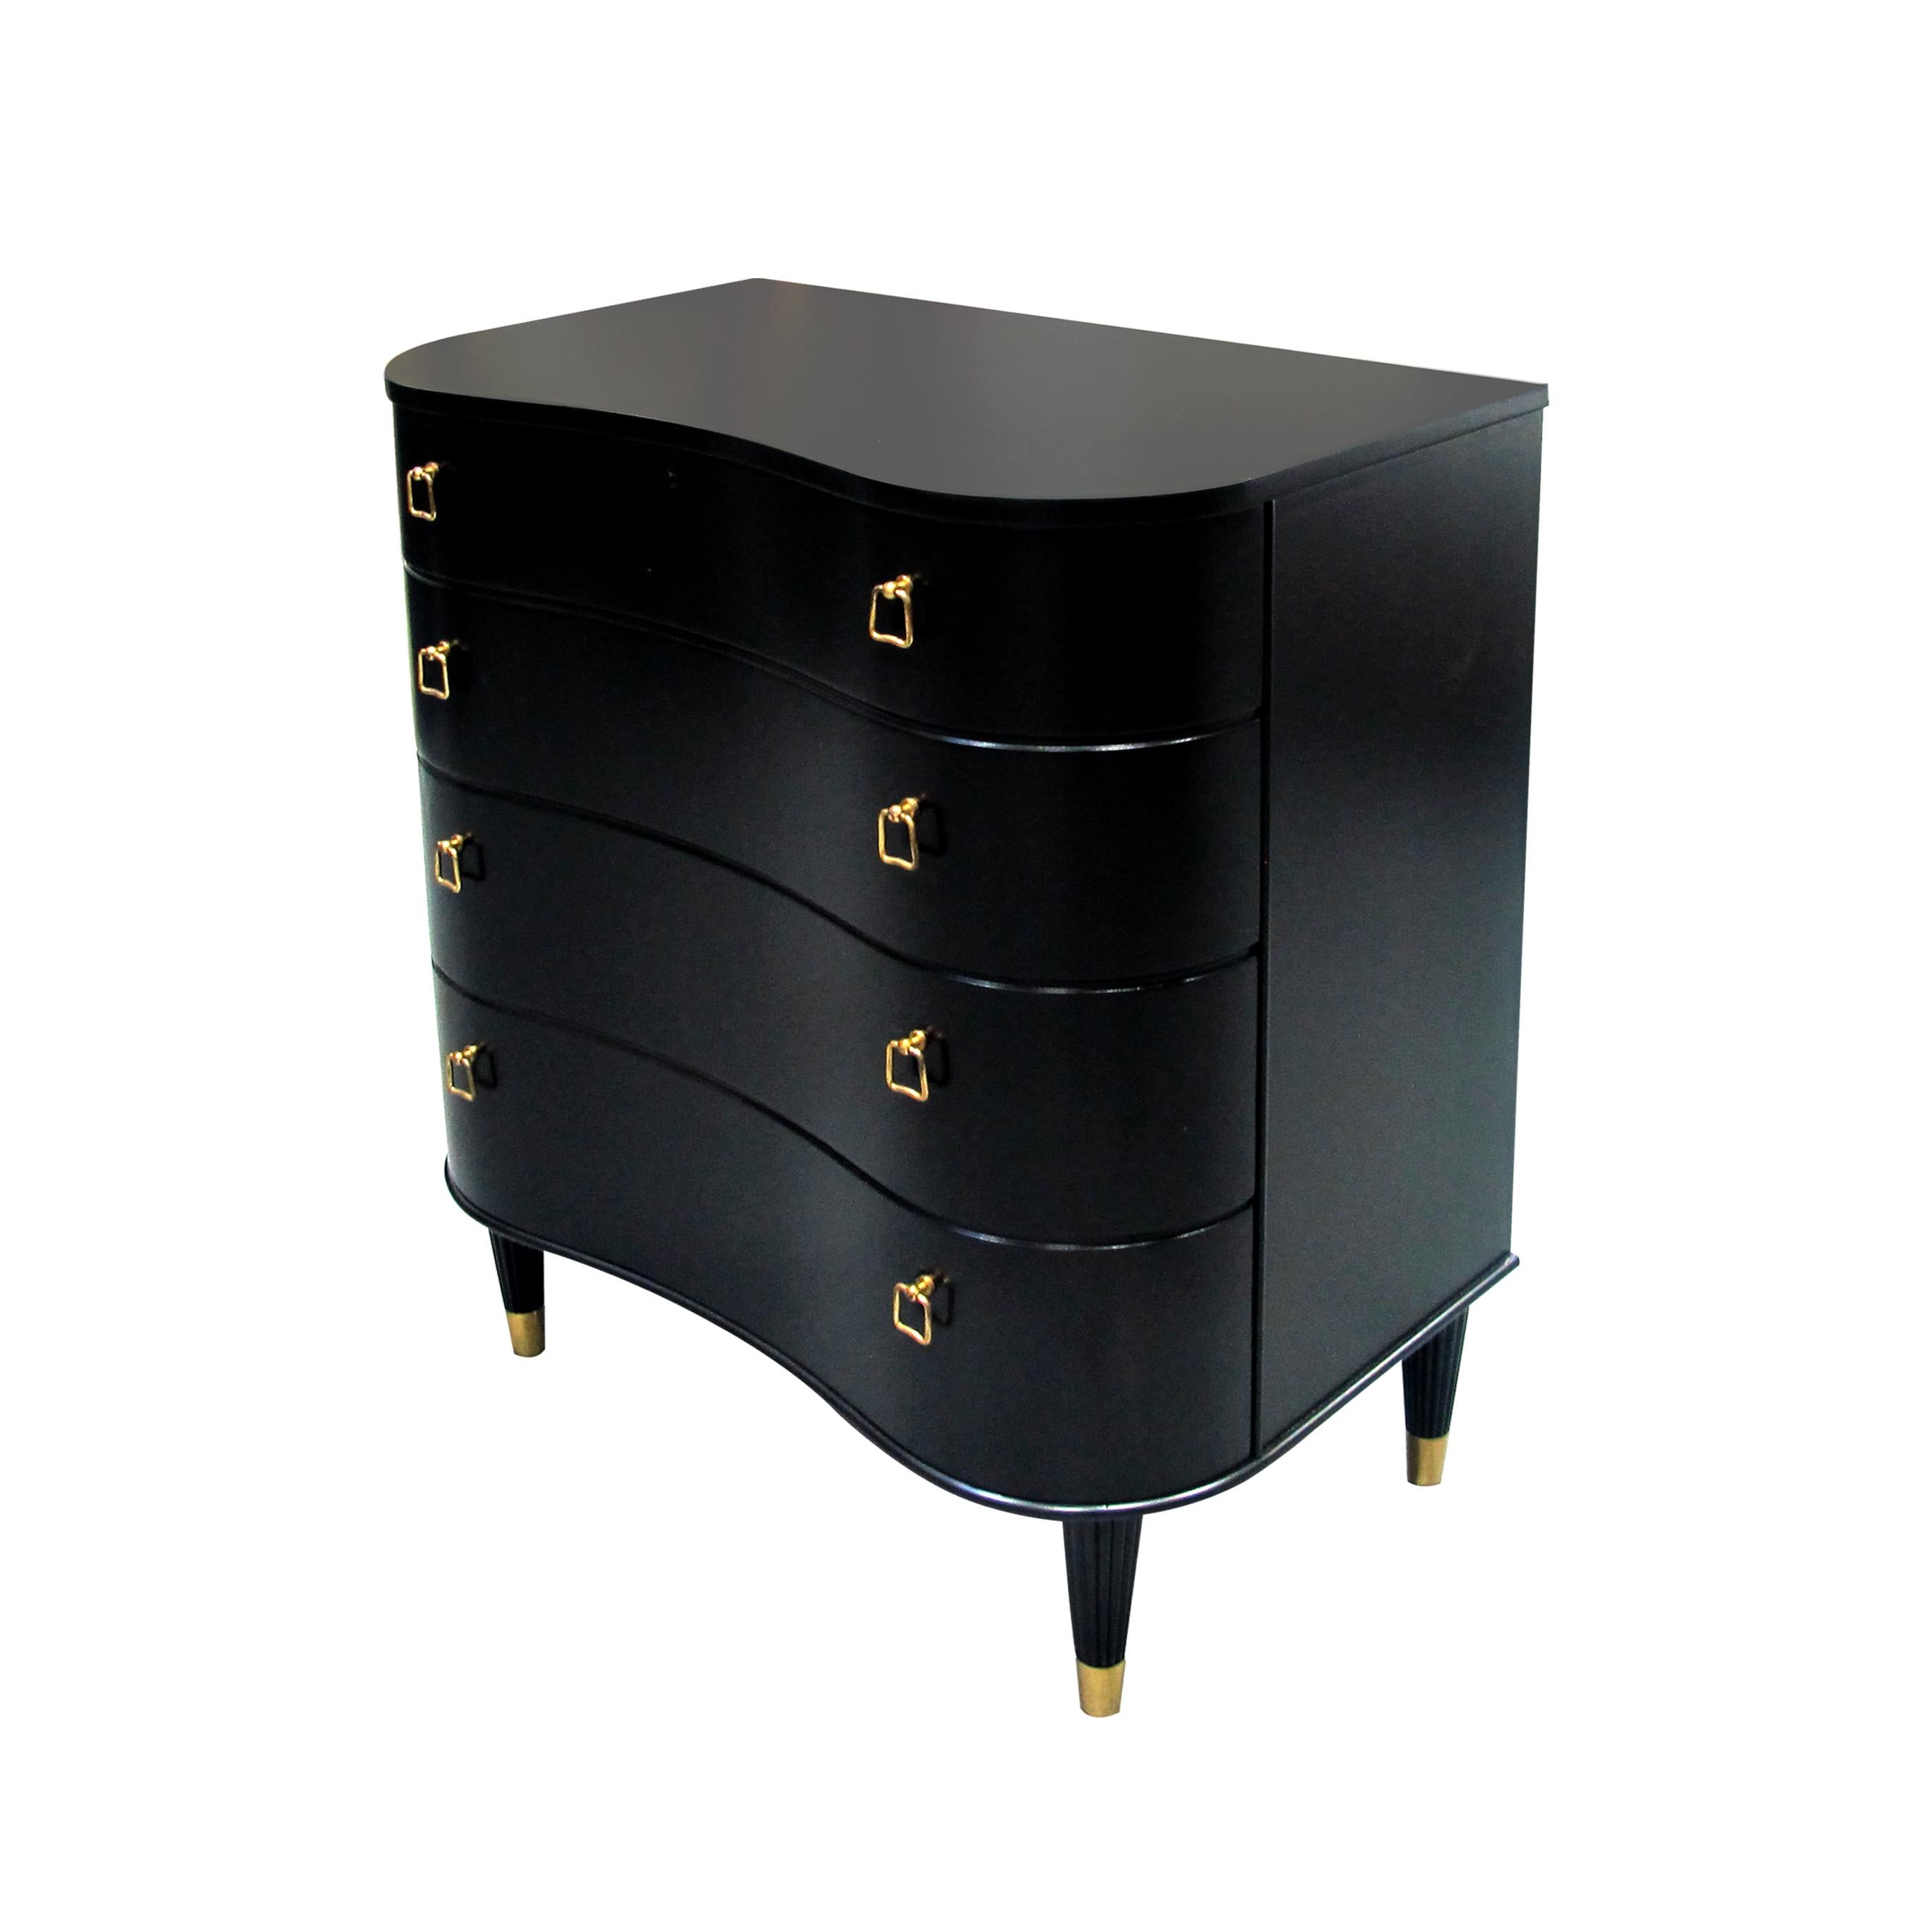 A very well-made and elegant curved fronted chest of drawers with four drawers and brass handles. The chest of drawers is attributed to Swedish furniture designer Axel Larsson. The top drawer holds the lock mechanism to lock/unlock the four drawers.